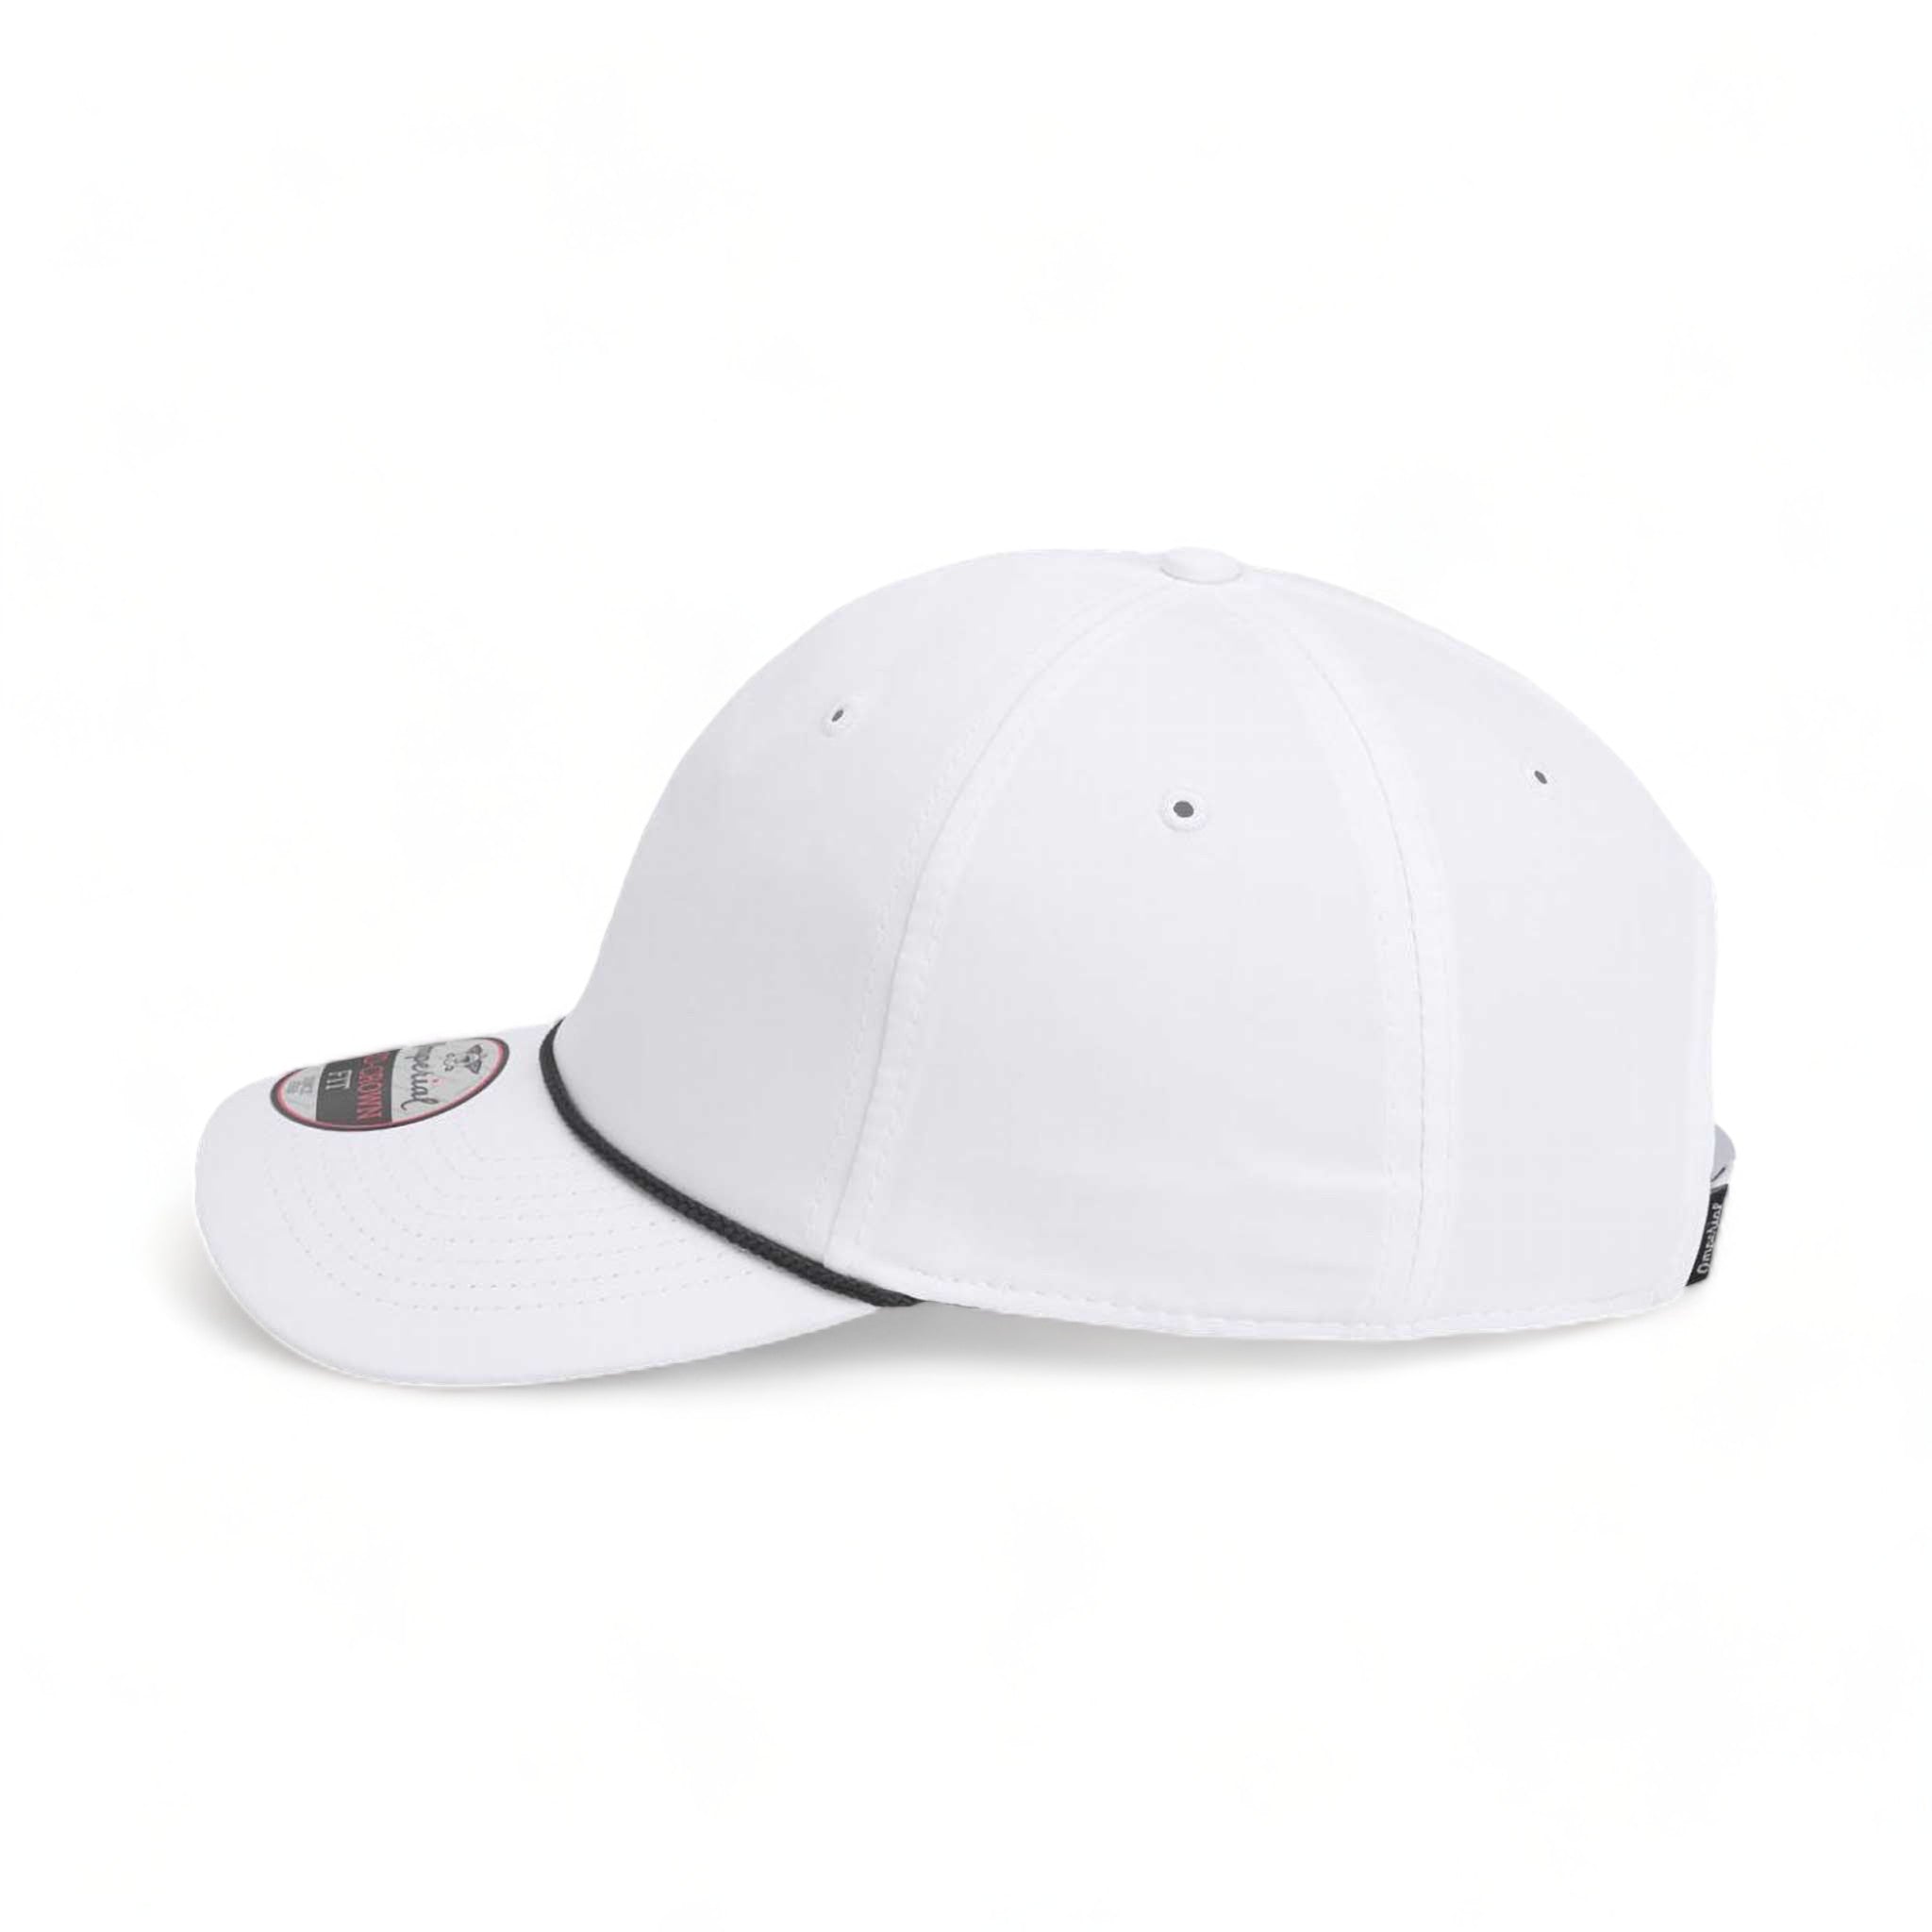 Side view of Imperial 7054 custom hat in white and black